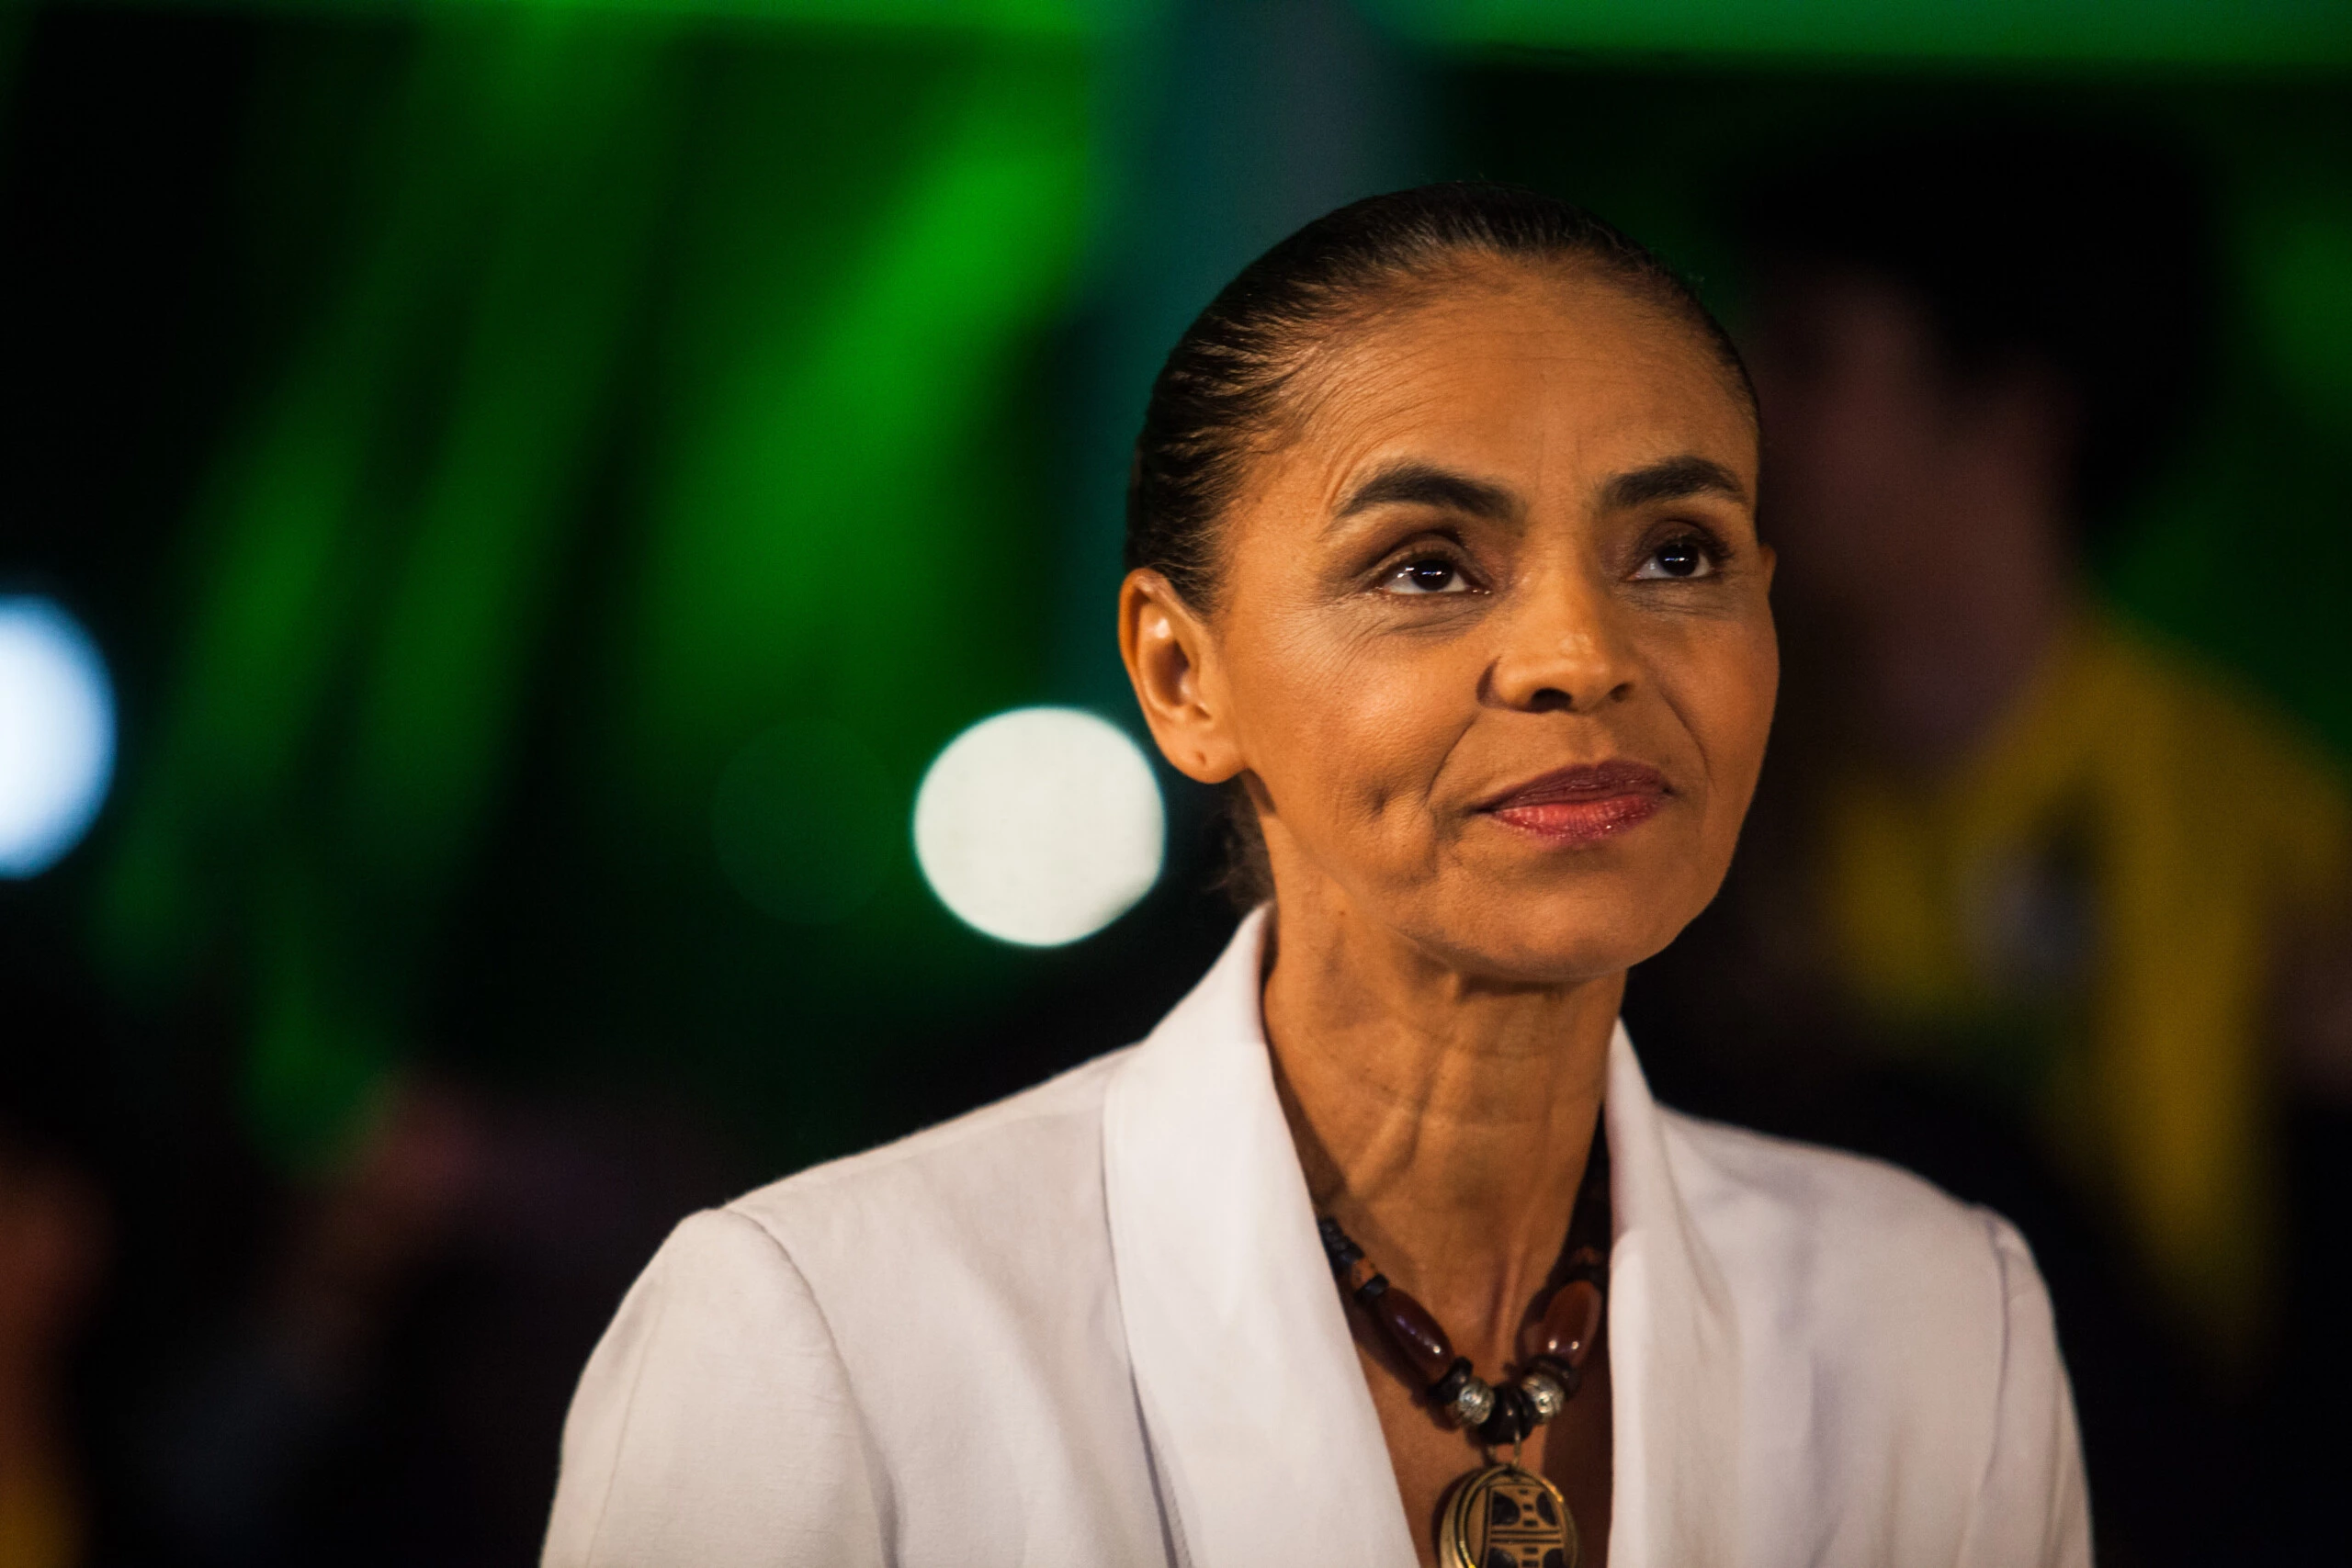 SAO PAULO, BRAZIL - OCTOBER 5: Brazilian candidate for President Marina Silva speaks during a press conference at the Brazilian Socialist Party on October 5, 2014 in Sao Paulo, Brazil. Marina Silva had 21% of the votes and will not move to the second round against the current President of the Republic, Dilma Rousseff and Aecio Neves. (Photos by Victor Moriyama/Getty Images)